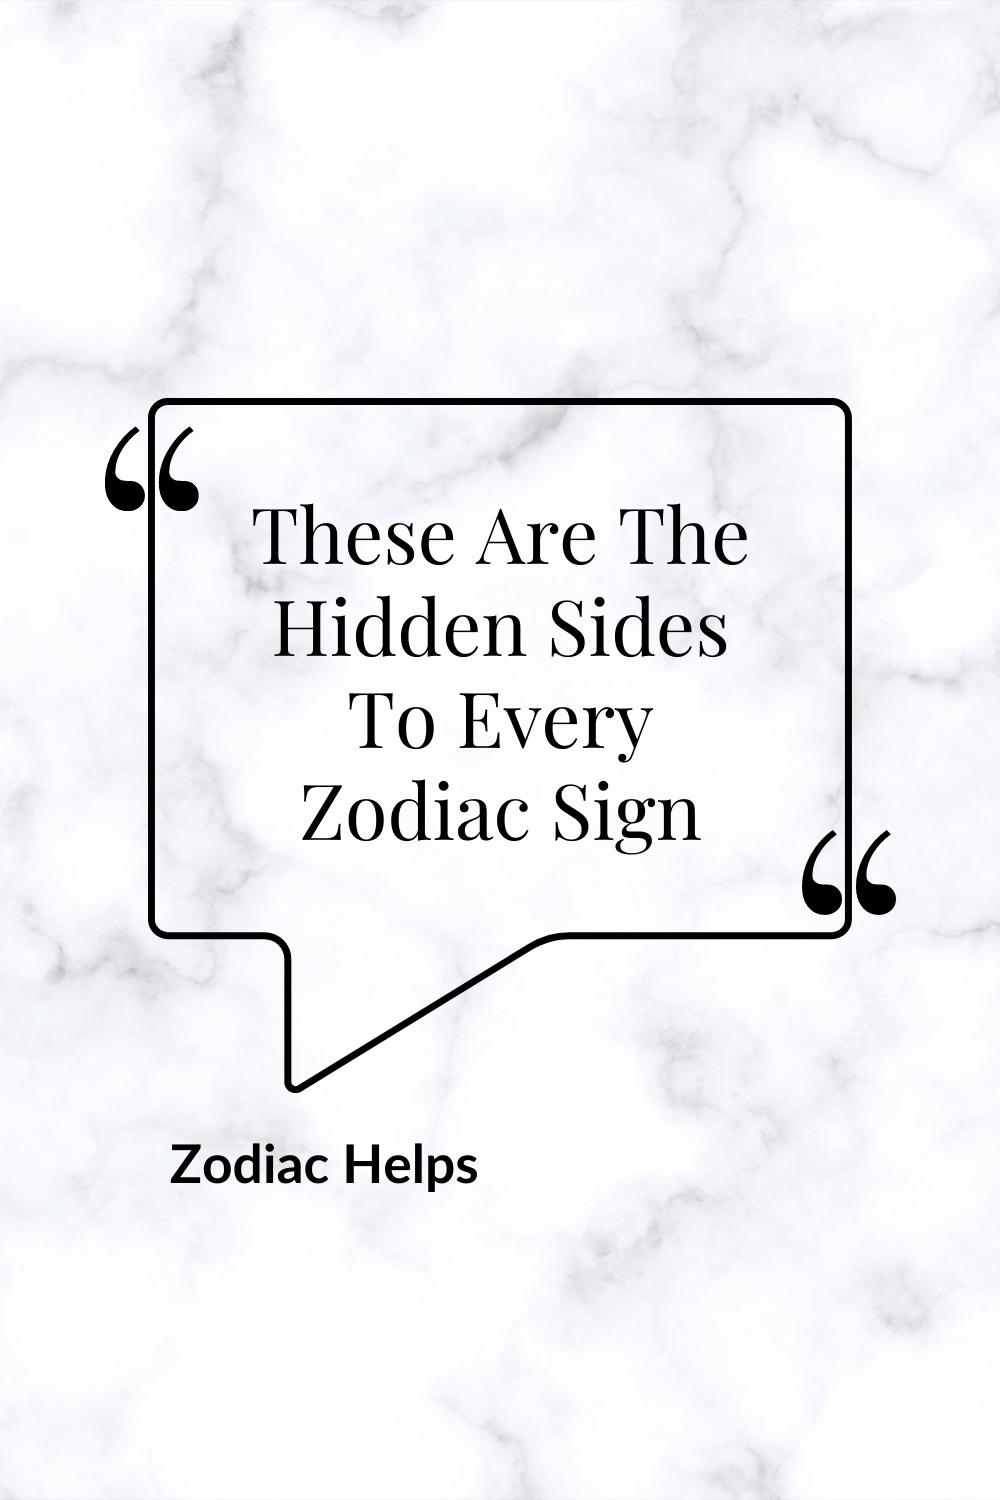 These Are The Hidden Sides To Every Zodiac Sign